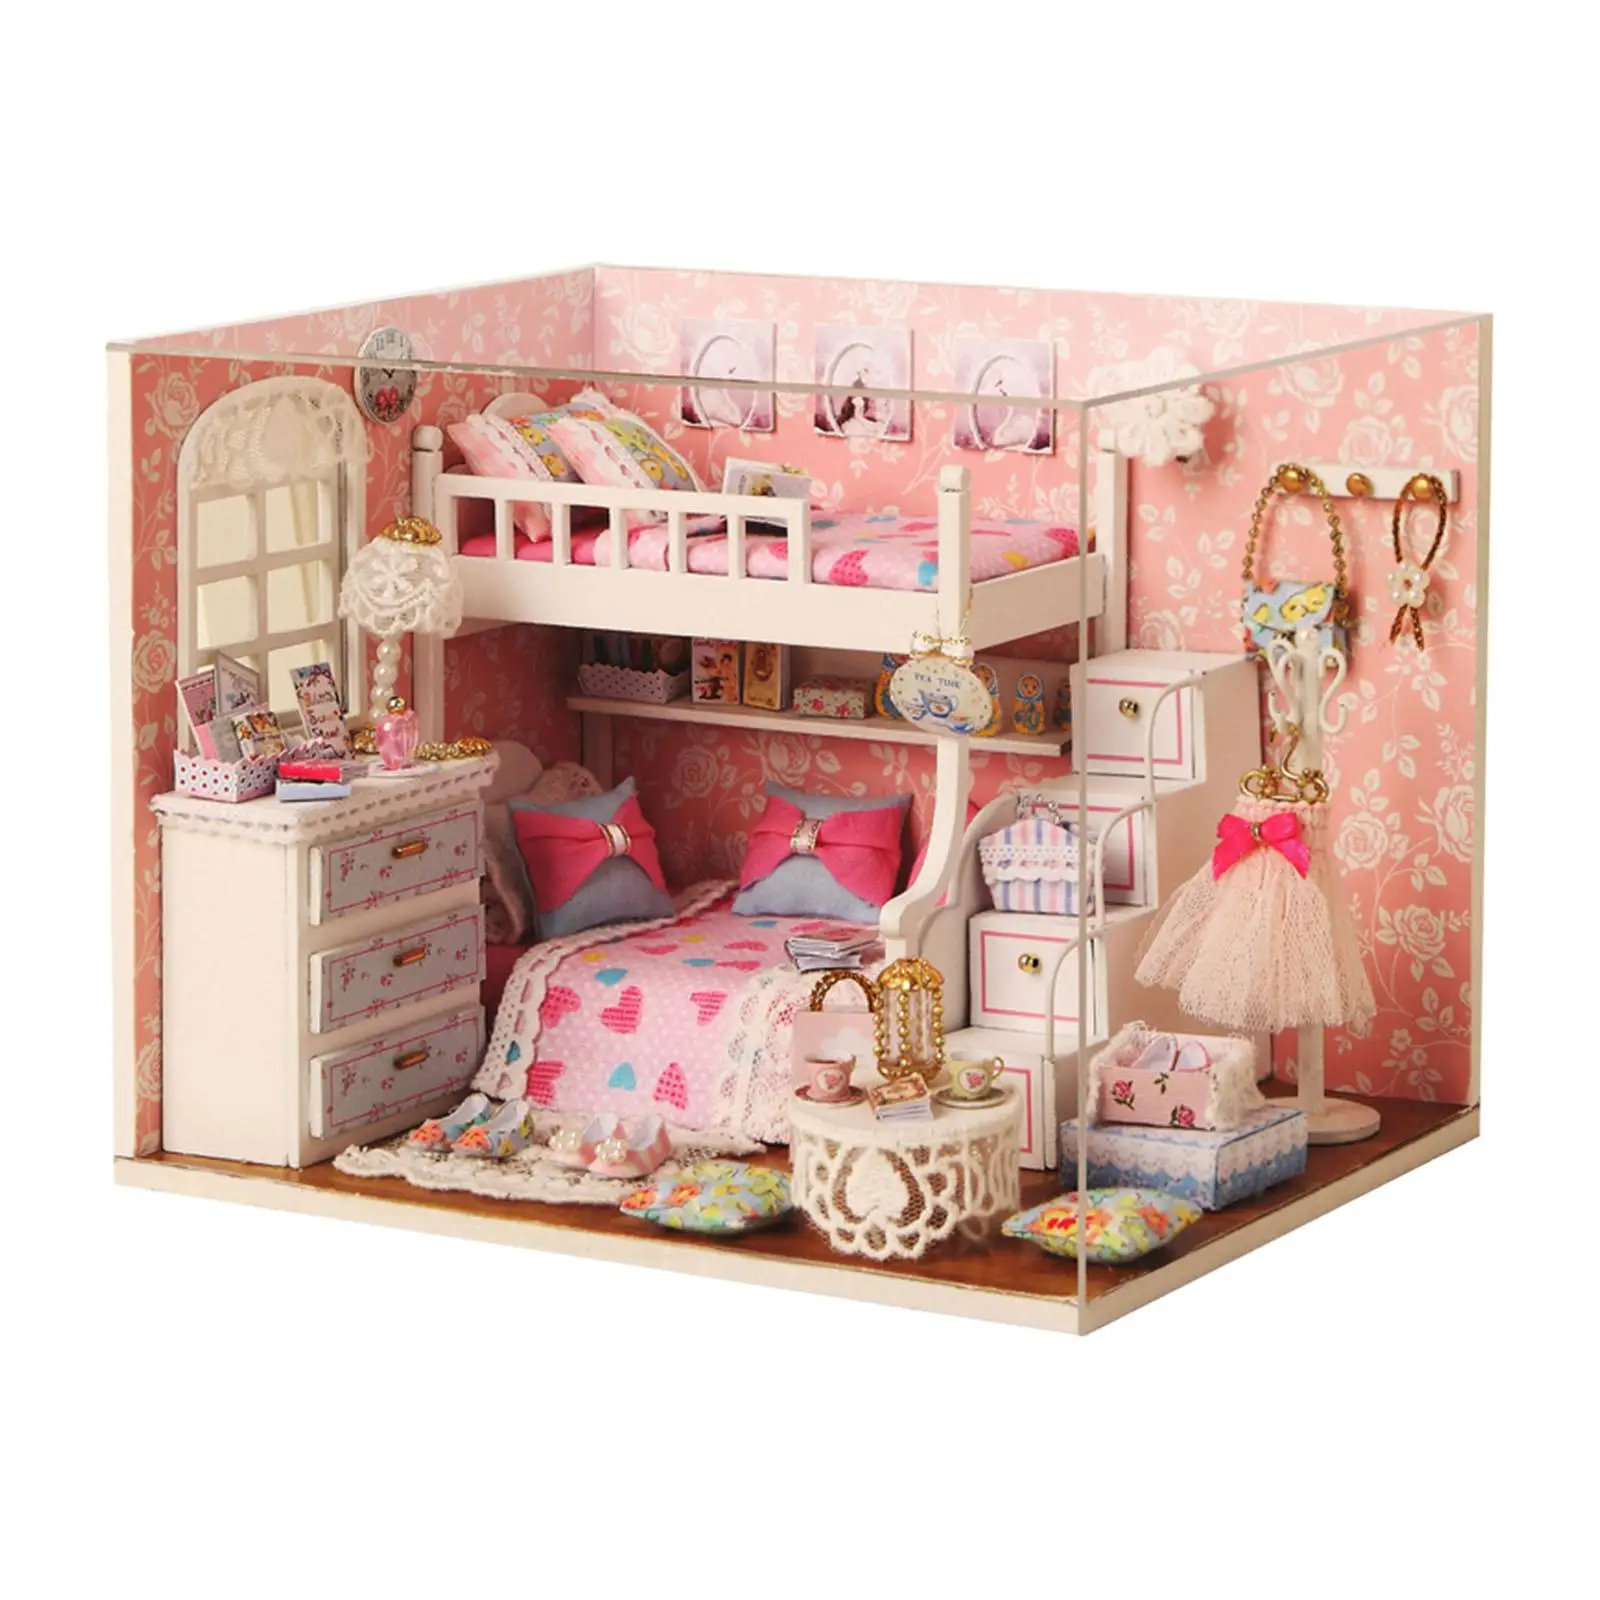 DIY Wooden Miniature Dollhouse Kits for Women Girls Handmade with Furniture and Ornaments Modern Birthday Gifts Creative Bedroom